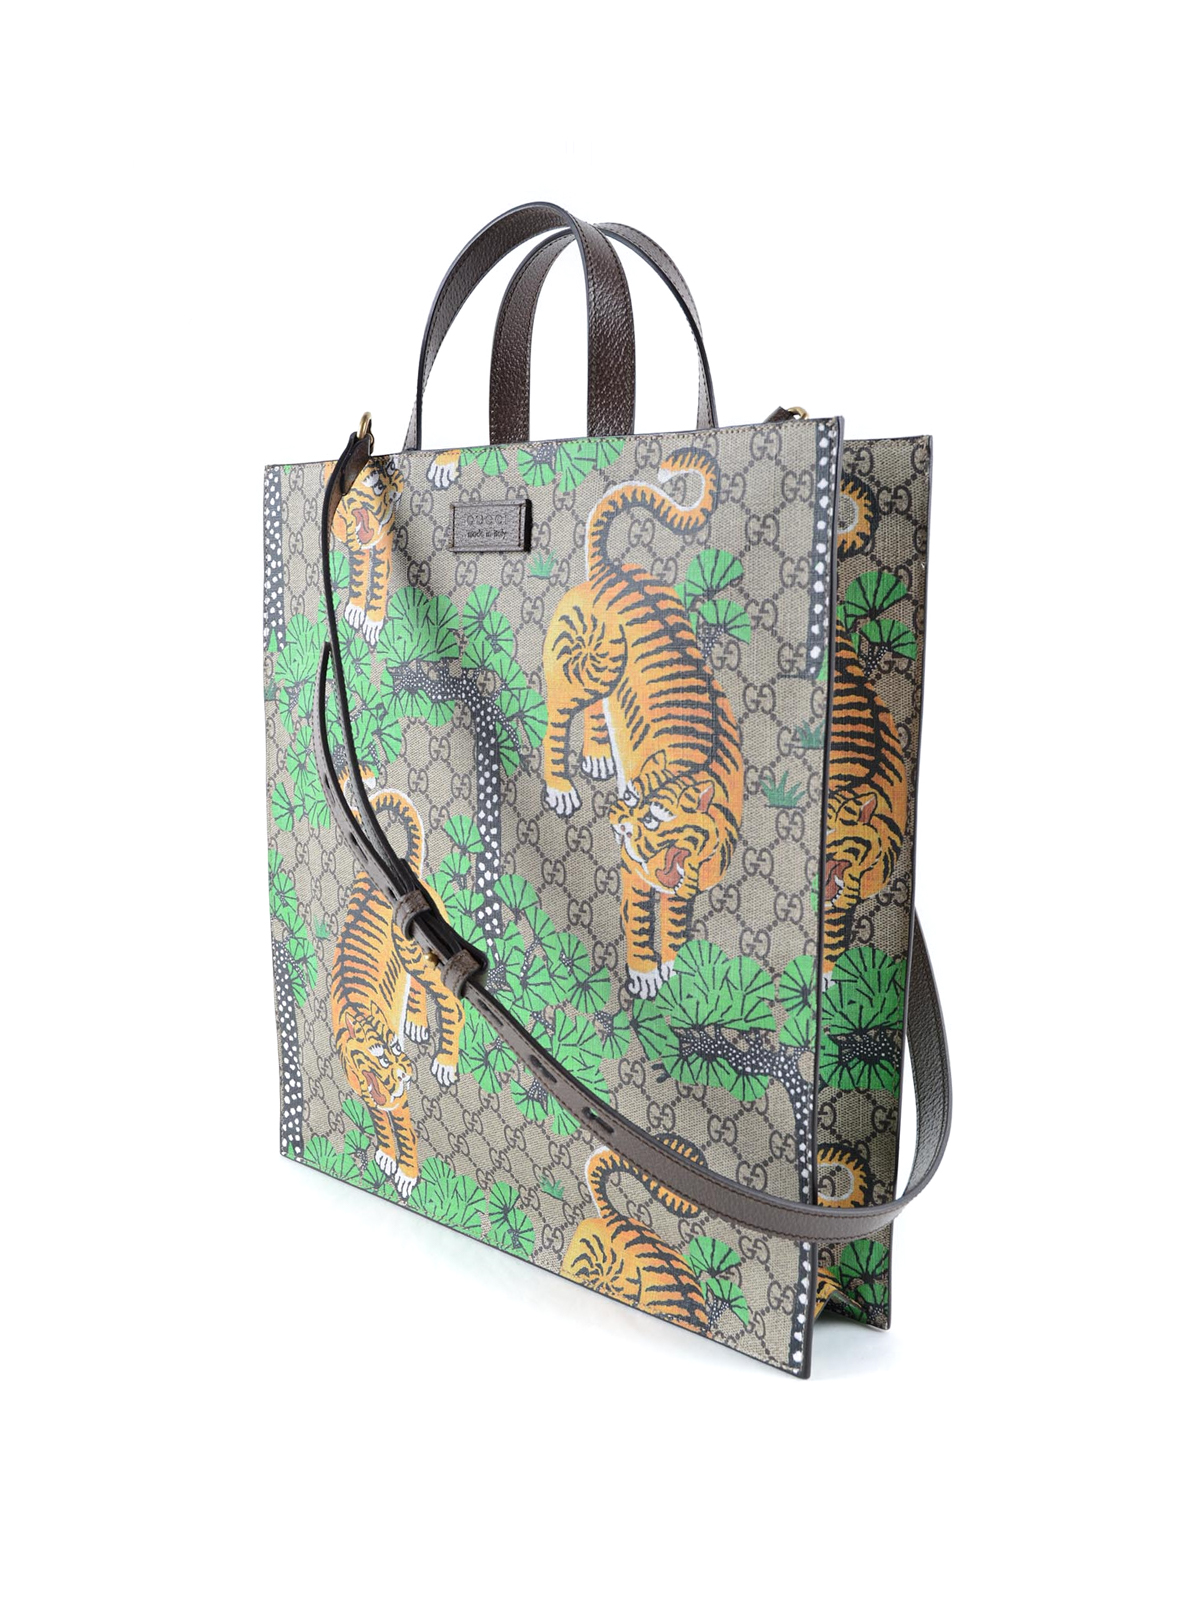 Gucci Bengal print GG canvas tote by Gucci - totes bags | Shop online at literacybasics.ca